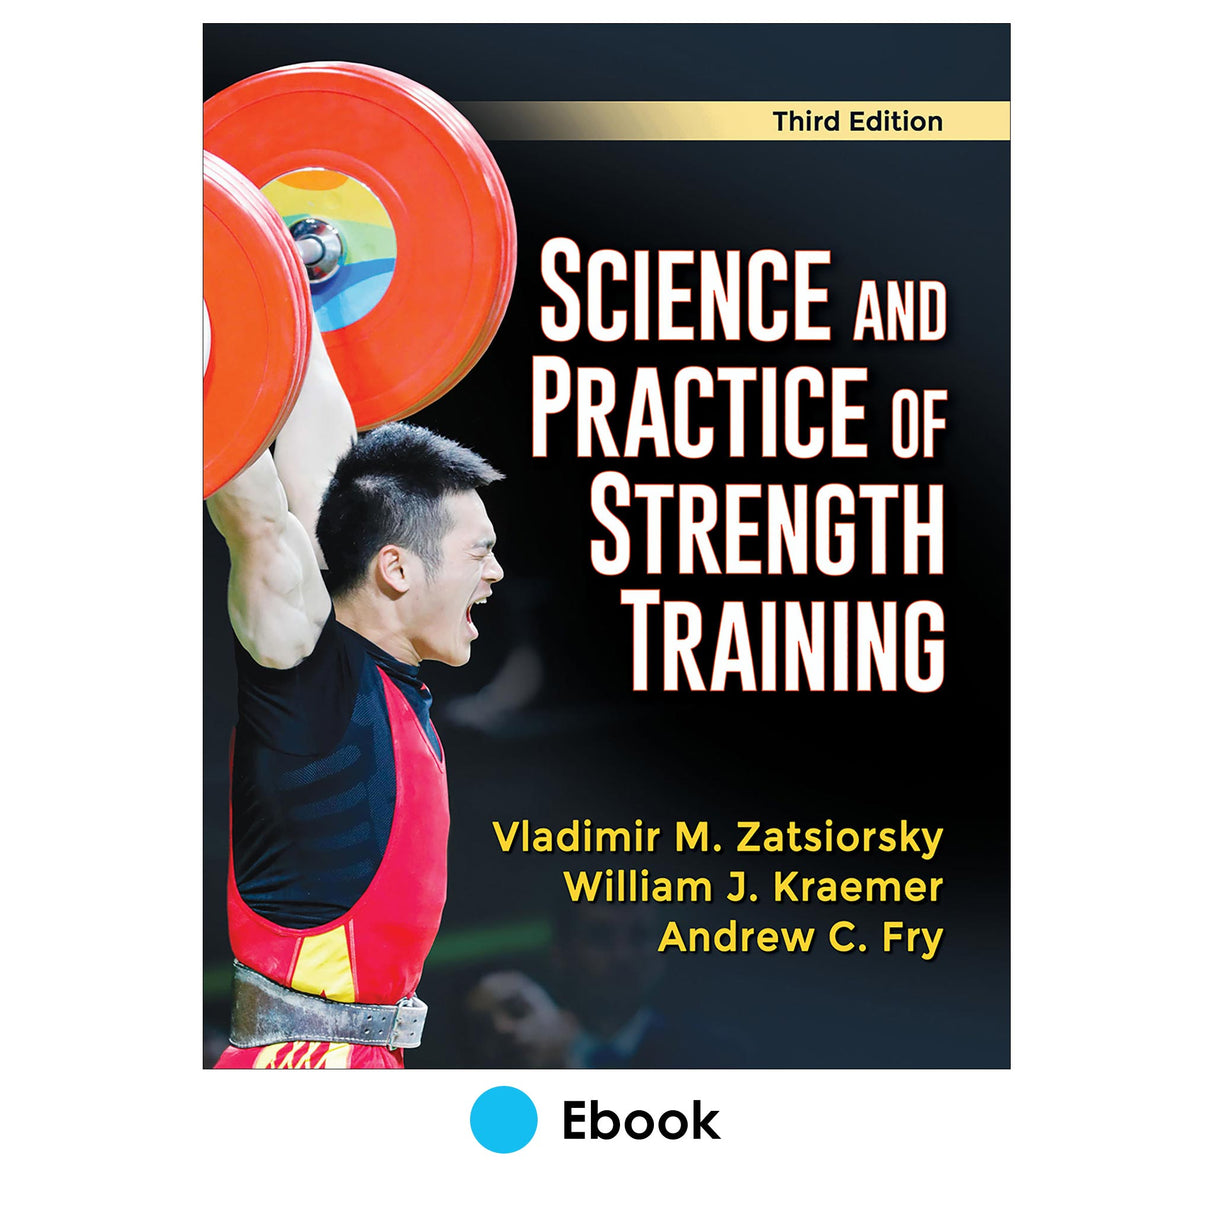 Science and Practice of Strength Training 3rd Edition epub